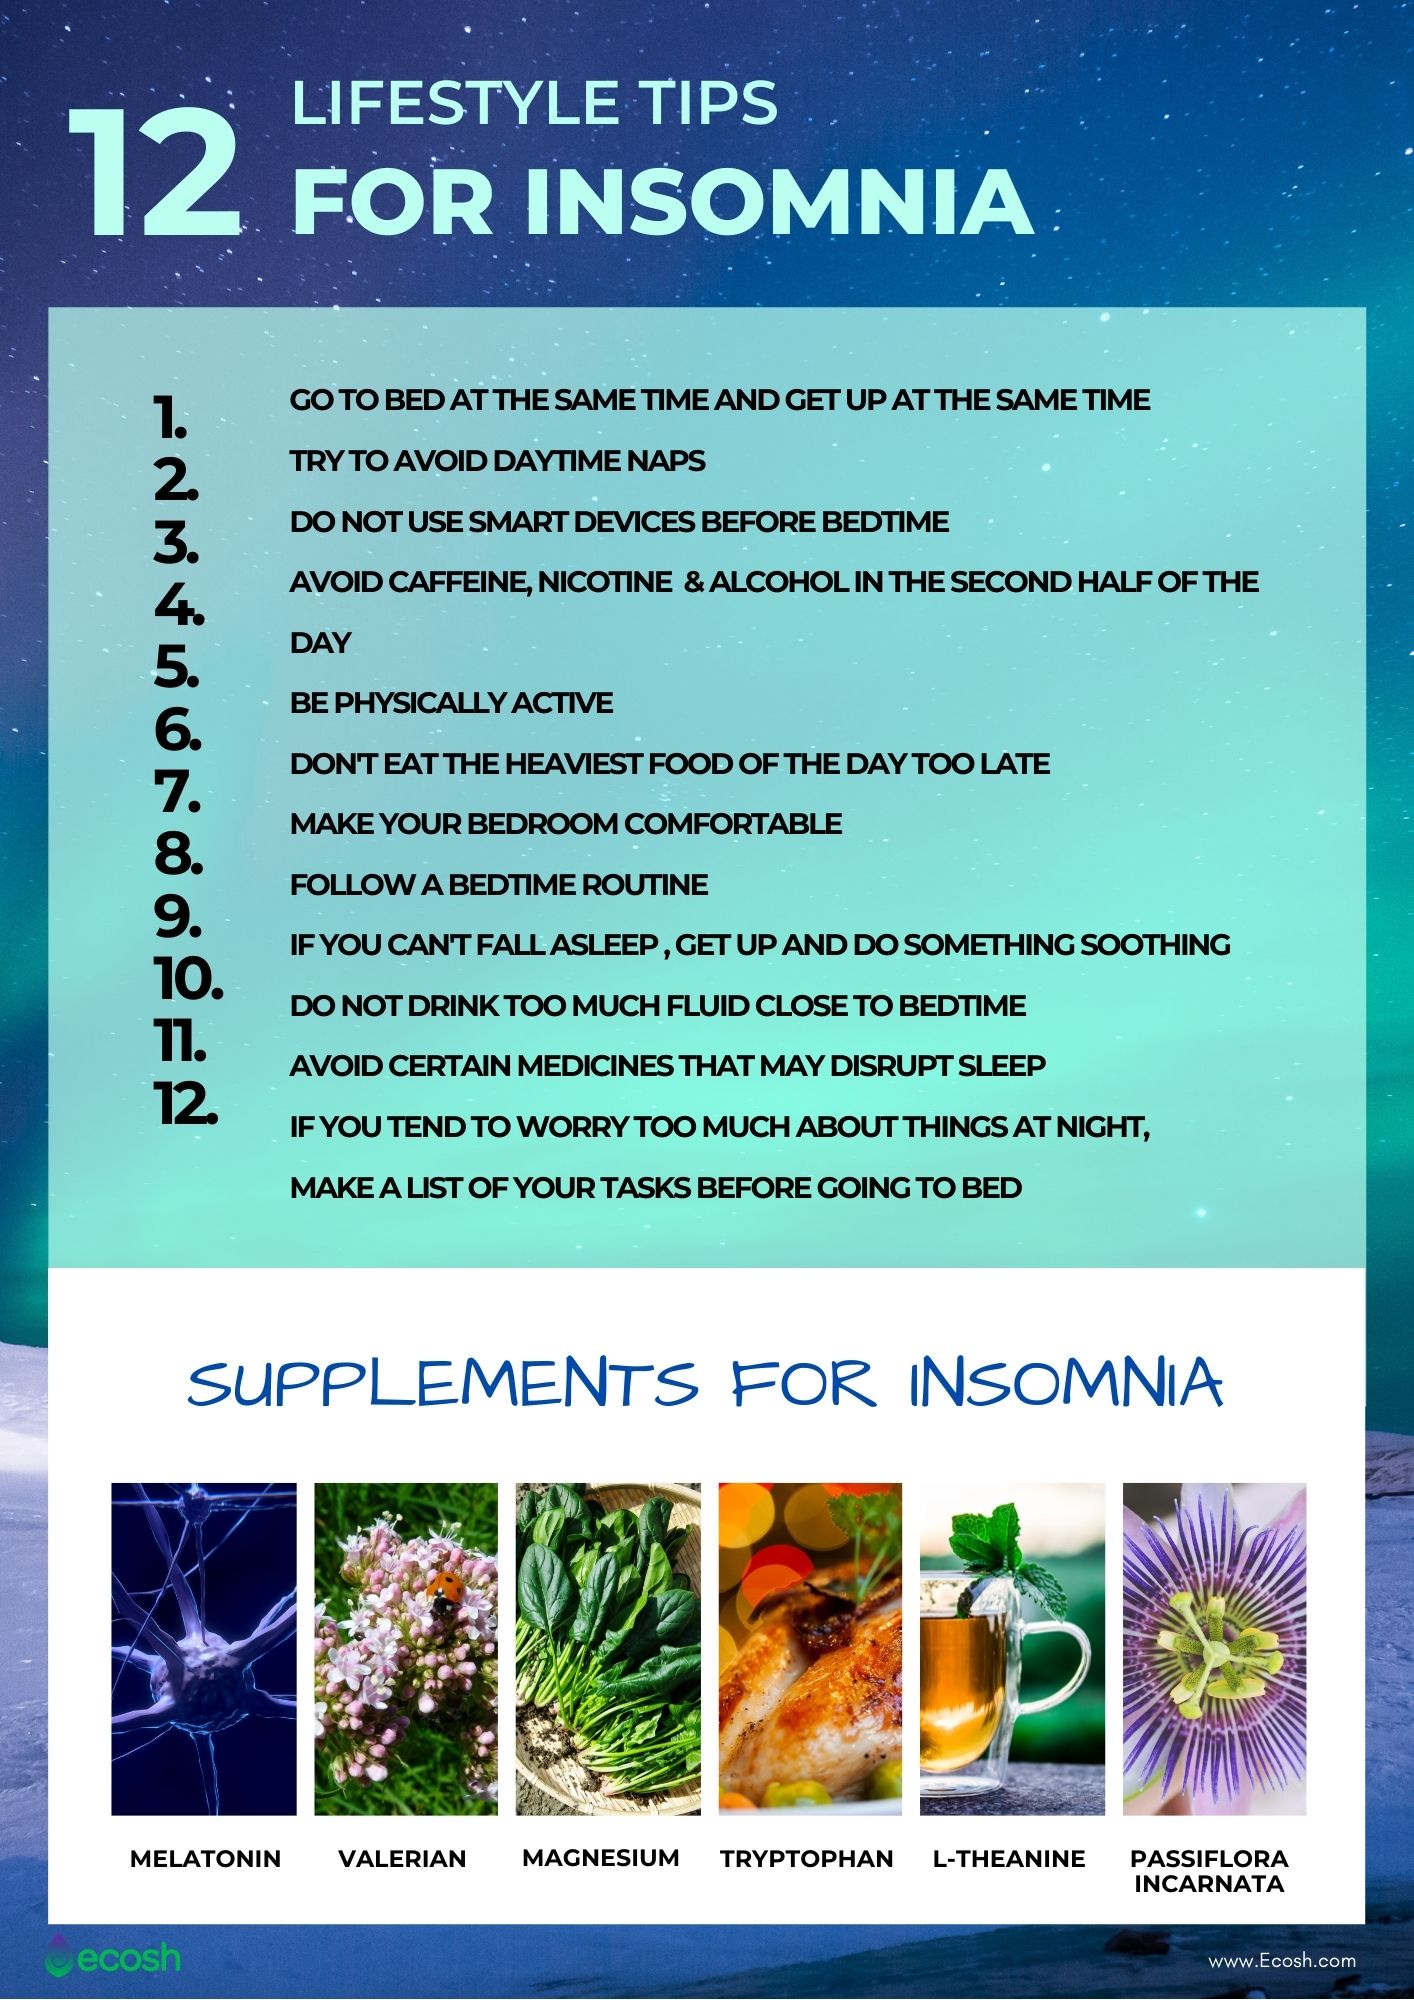 Ecosh_Lifestyle_tips_for_Insomnia_Supplements_for_Insomnia_Home_Remedies_for_Insomnia_Herbal_Remedies_for_Insomnia_Alternative_Medicine_for_Insomia_Insomnia_Natural_Treatment_How_to_Treat_Insomnia